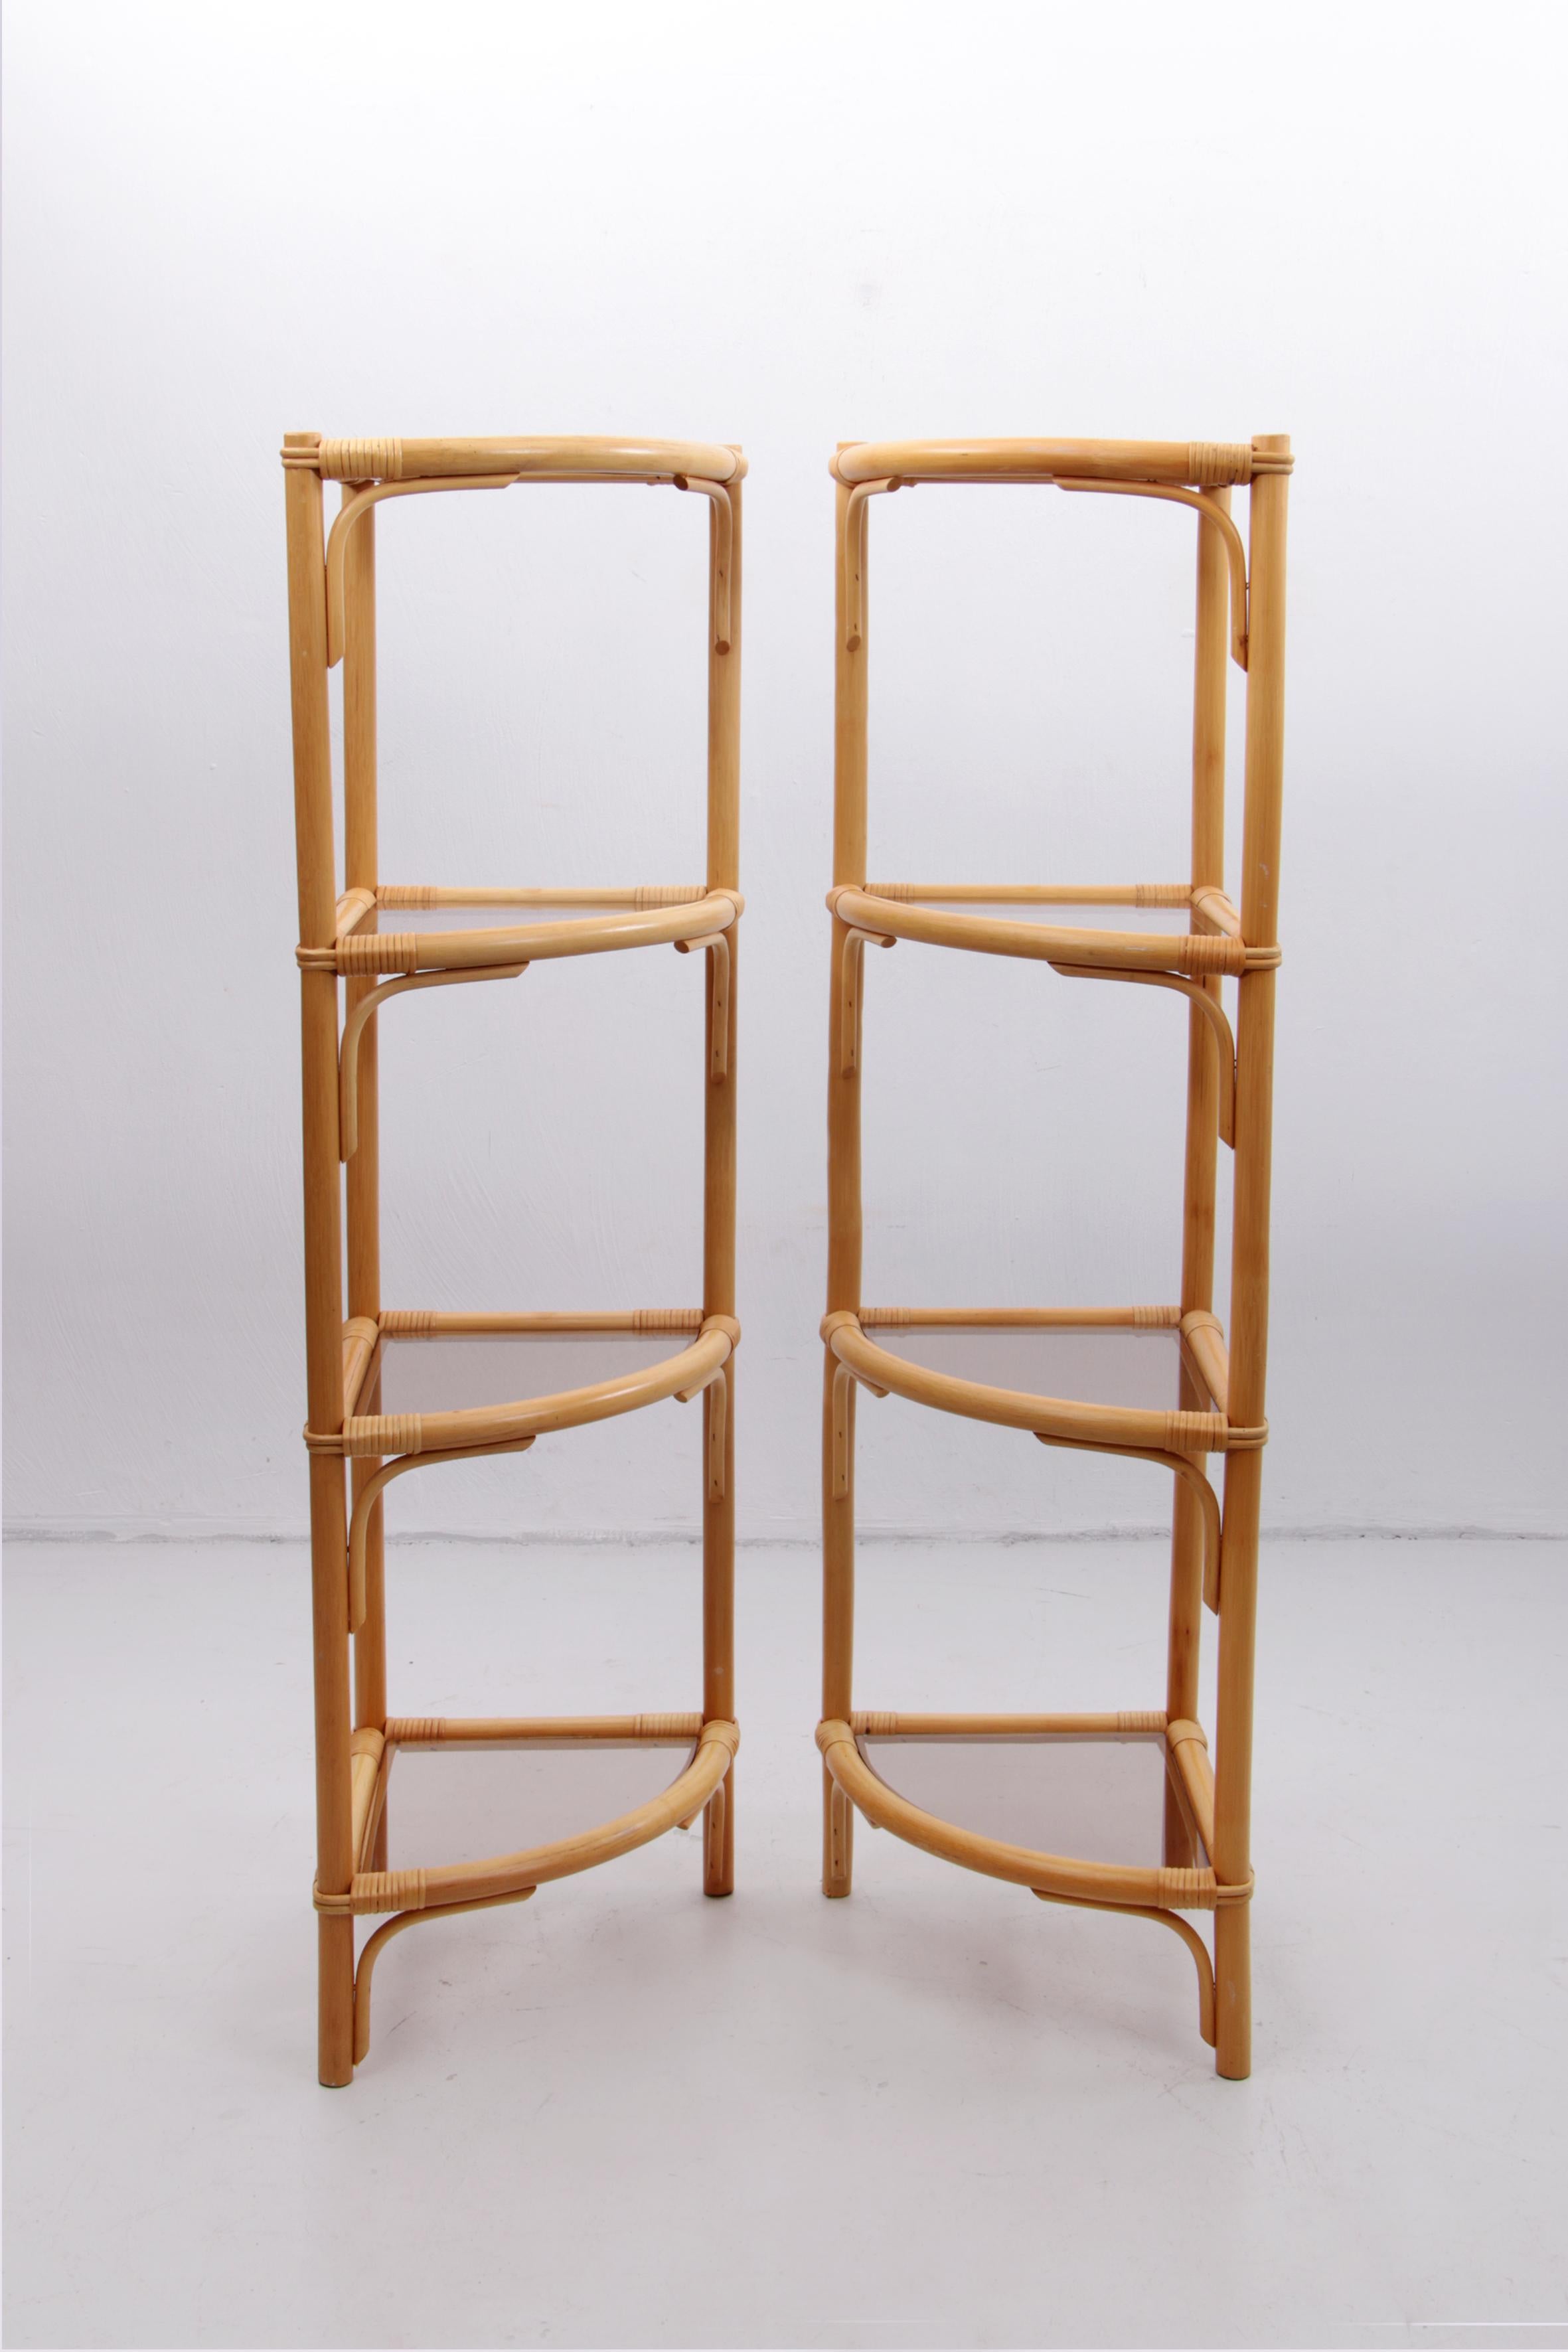 Large Bamboo Wall Unit with Bamboo Arches and Dark Glass, Denmark 13